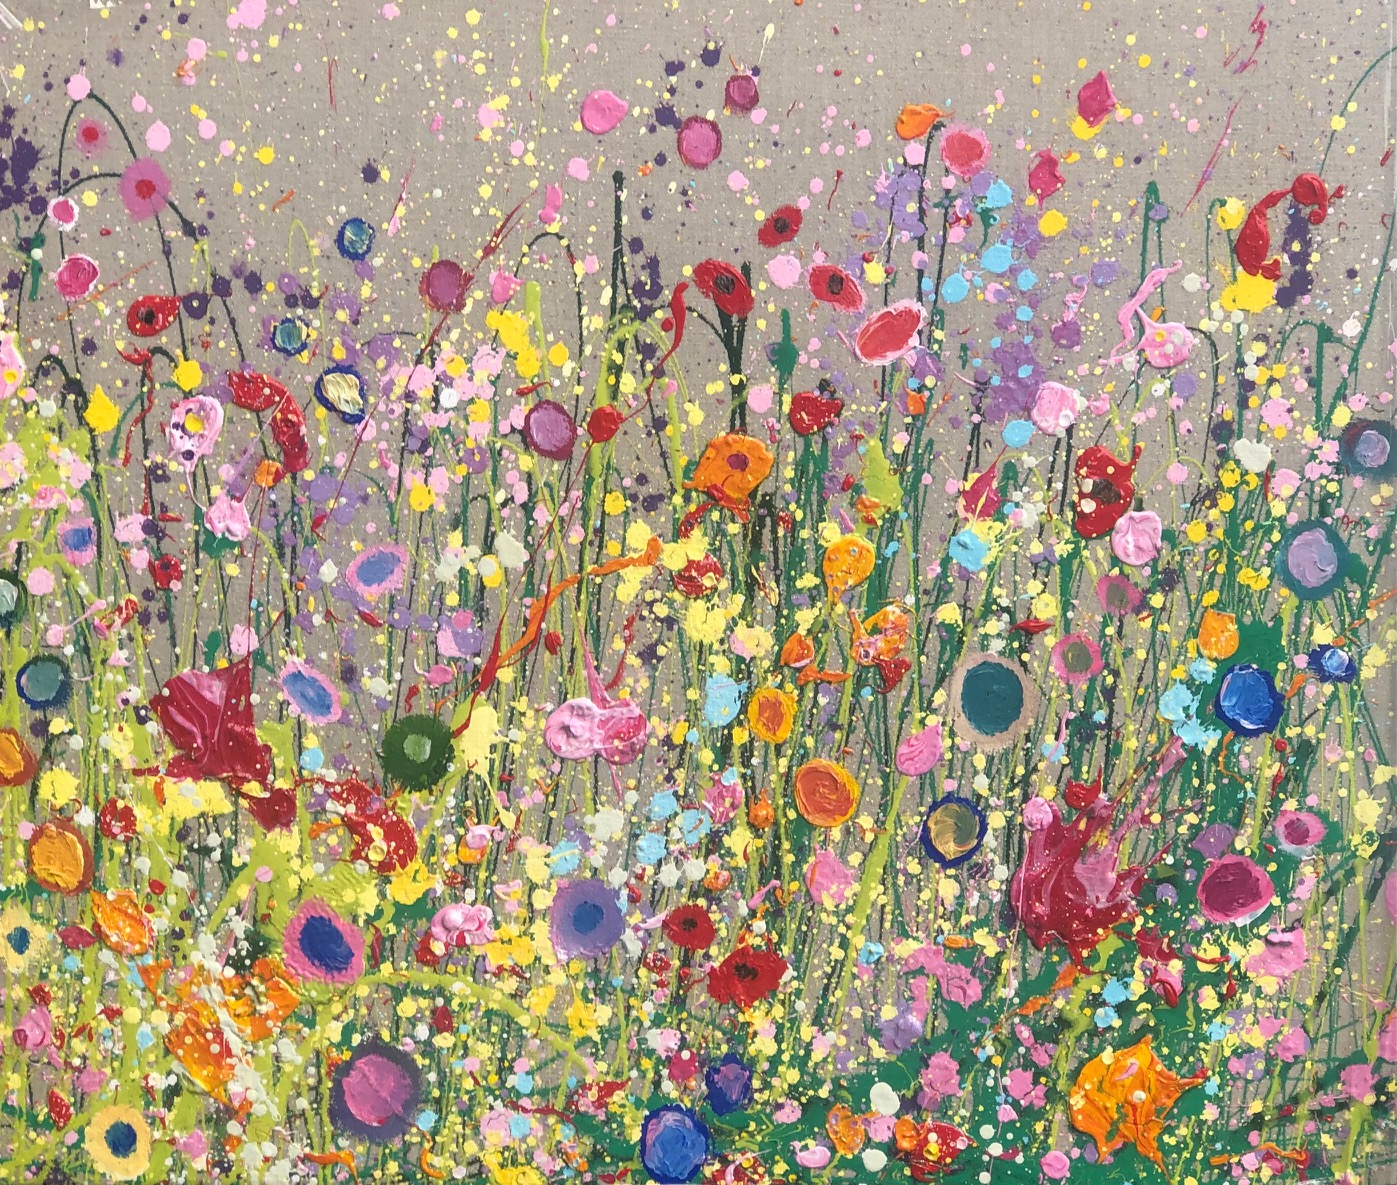 Sweetest Champagne Kisses (ii)  by Yvonne Coomber